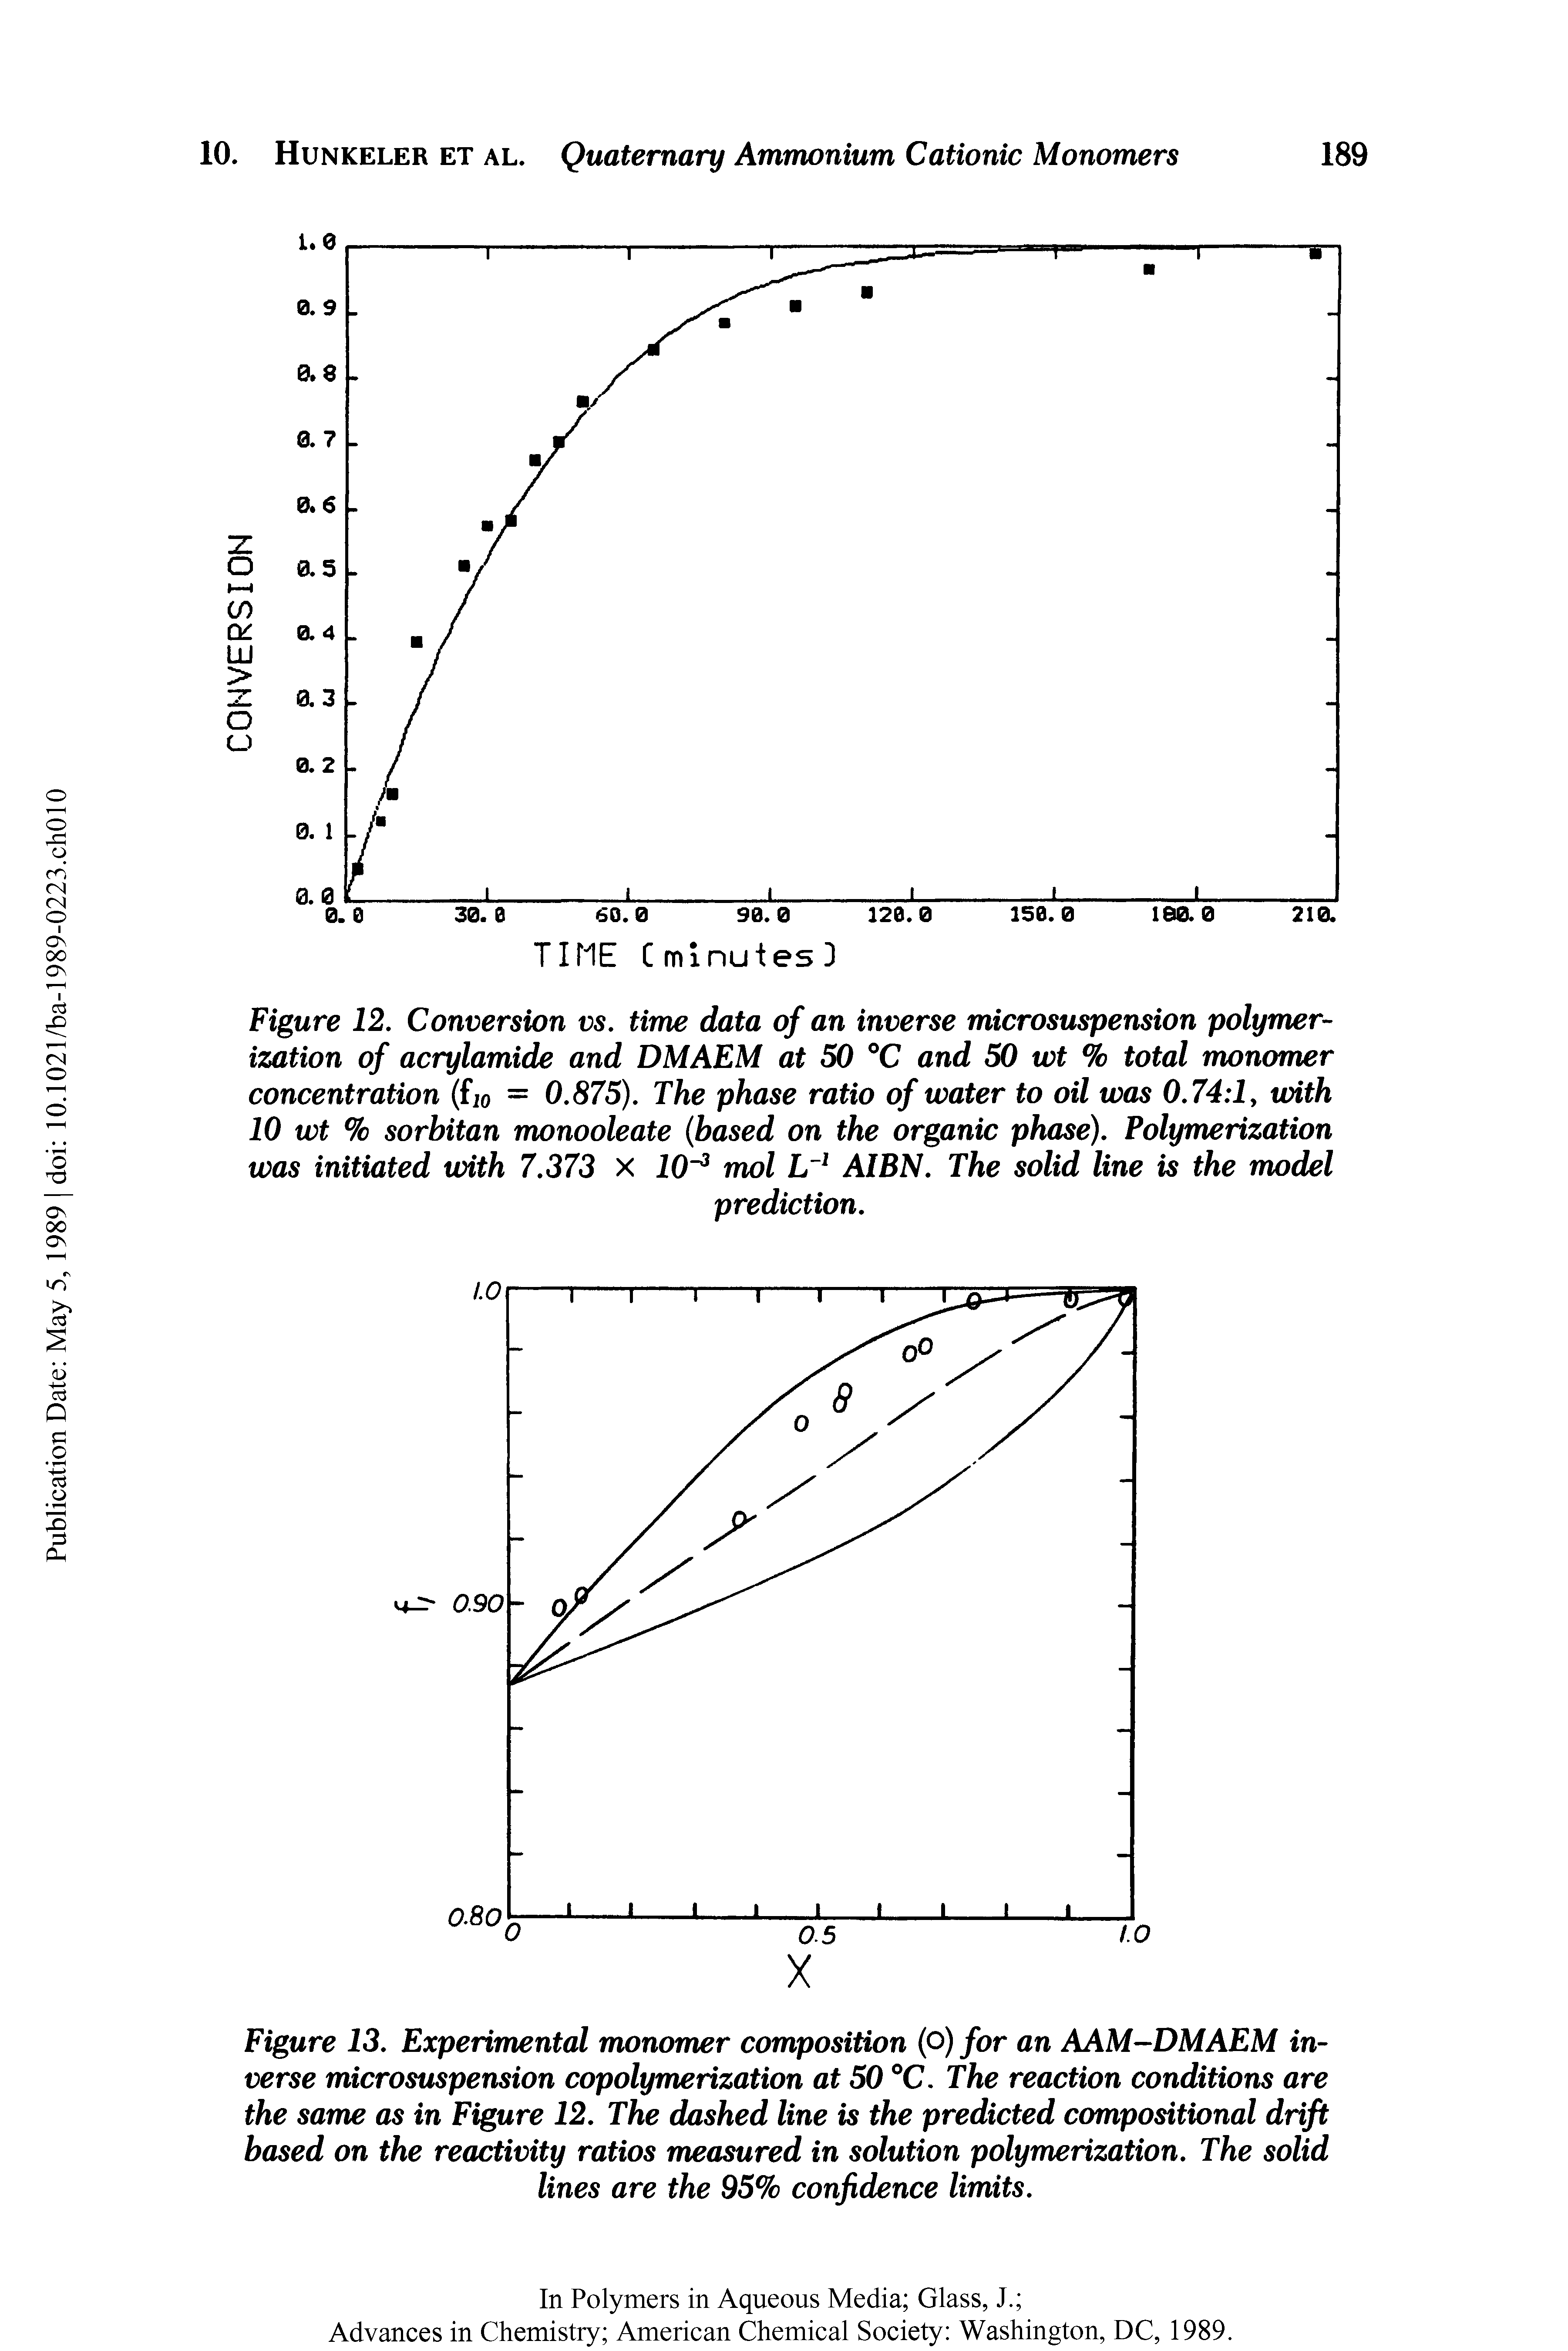 Figure 12. Conversion vs. time data of an inverse microsuspension polymerization of acrylamide and DMAEM at 50 C and 50 wt % total monomer concentration (fjo = 0.875). The phase ratio of water to oil was 0.74 1 y with 10 wt % sorbitan monooleate (based on the organic phase). Polymerization was initiated with 7.373 X 10 mol AIBN. The solid line is the model...